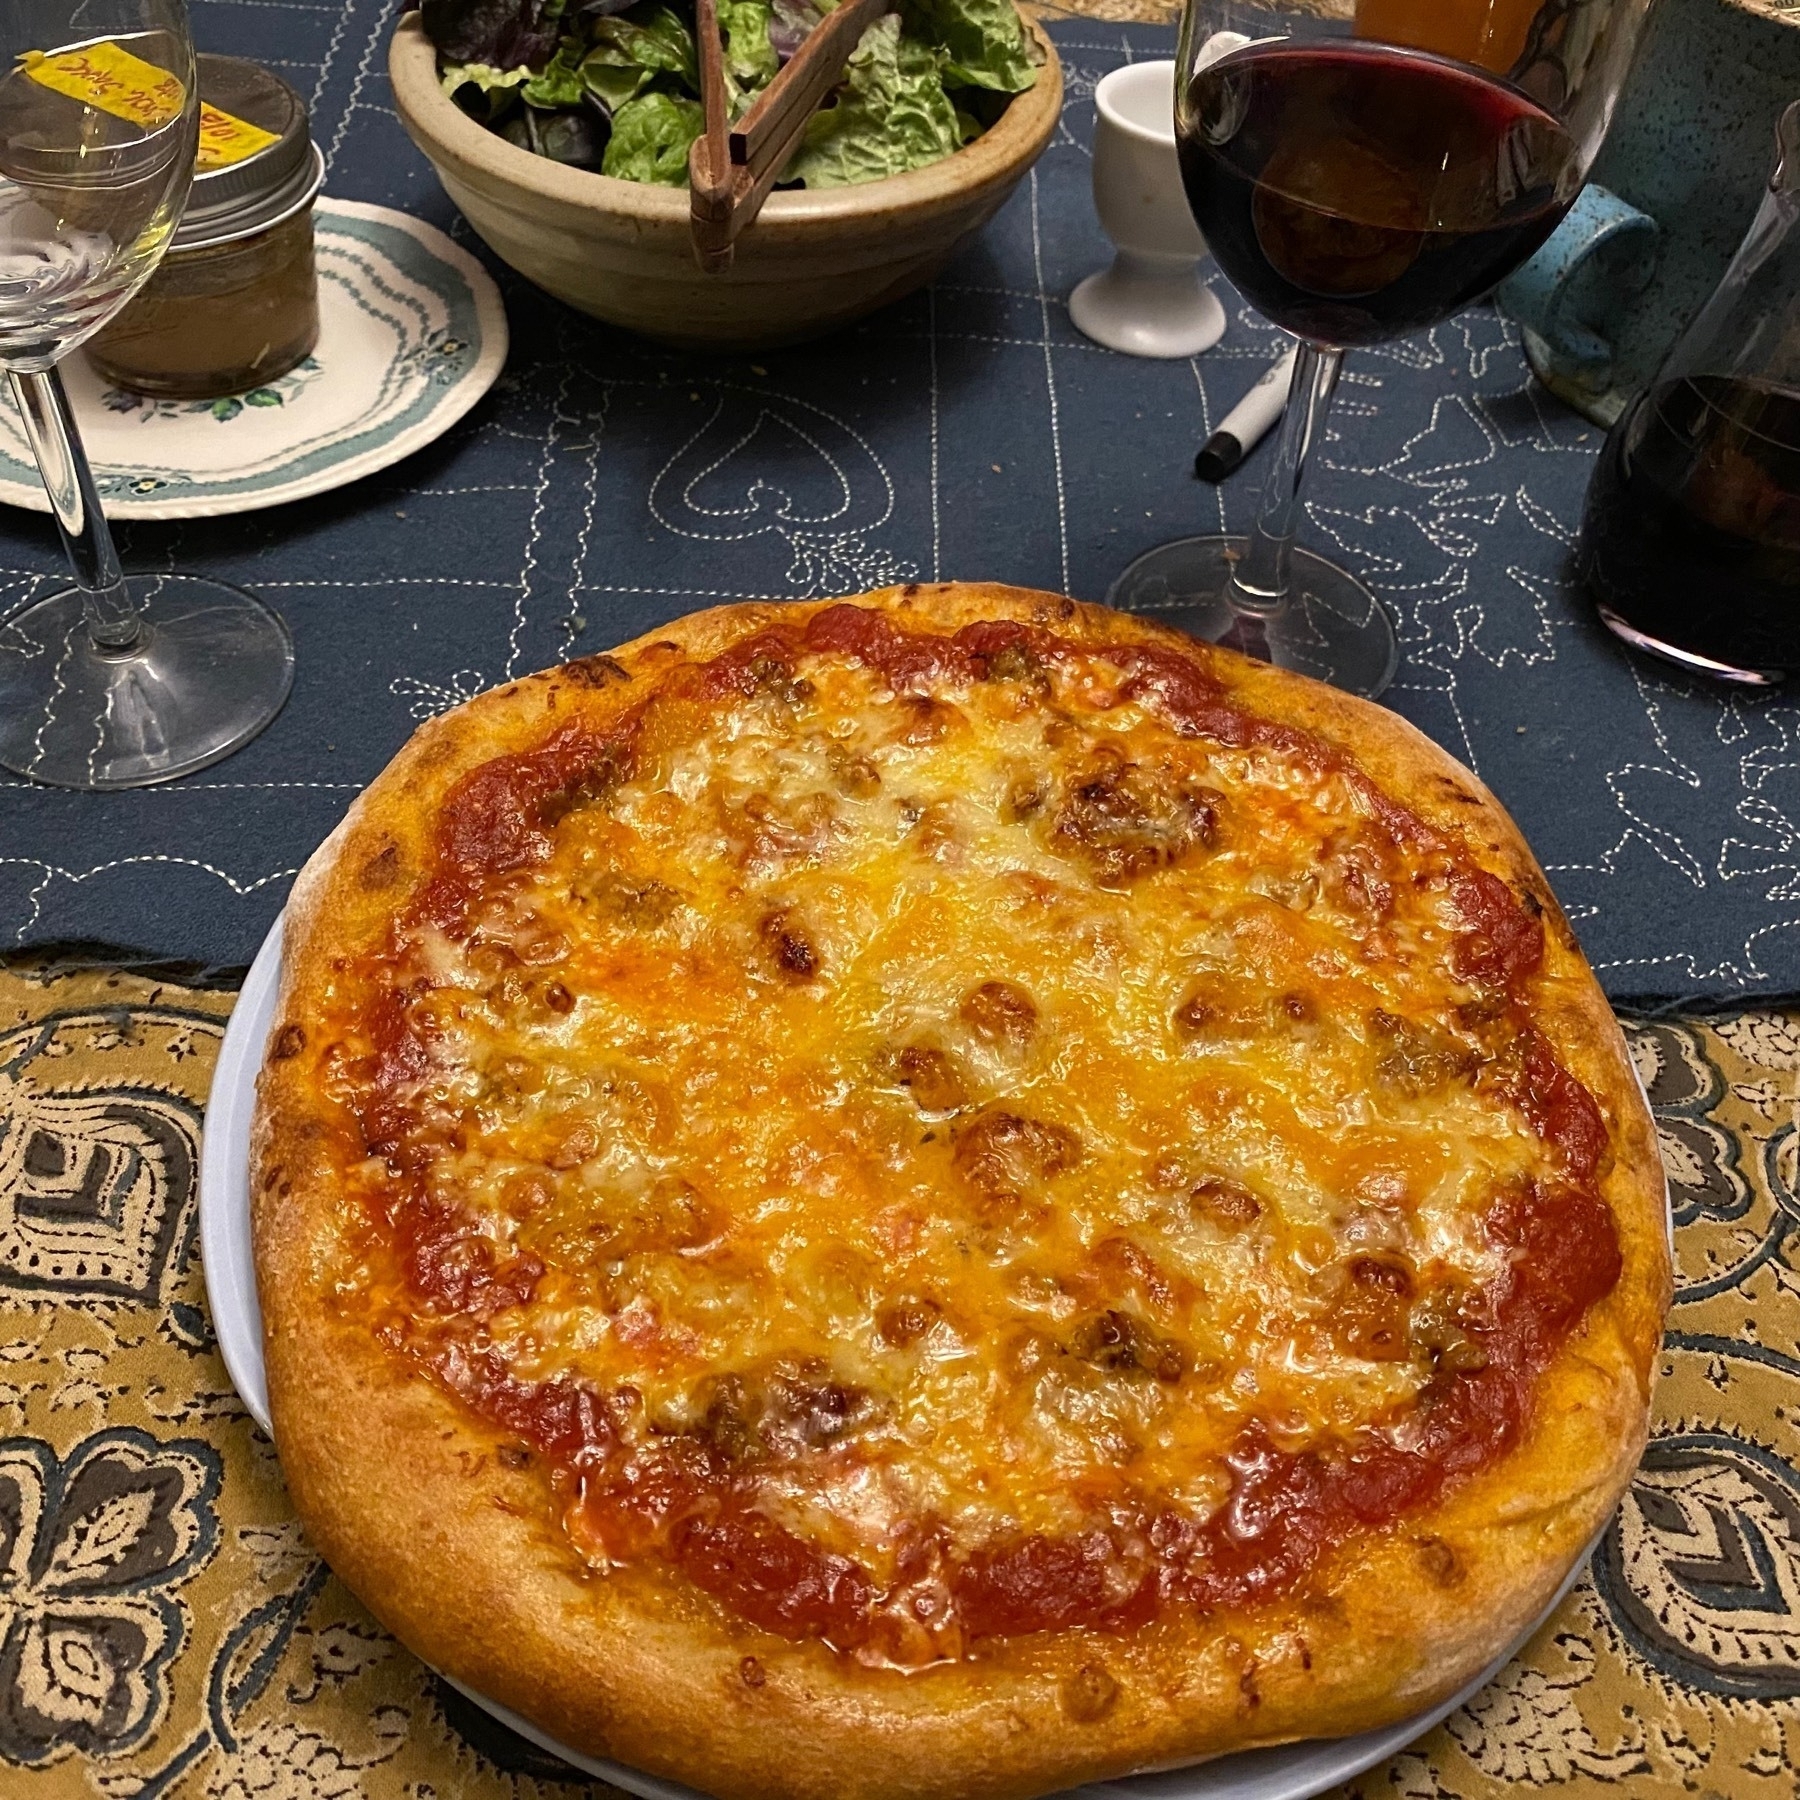 Small pizza on a table next to a salad and wine glass.